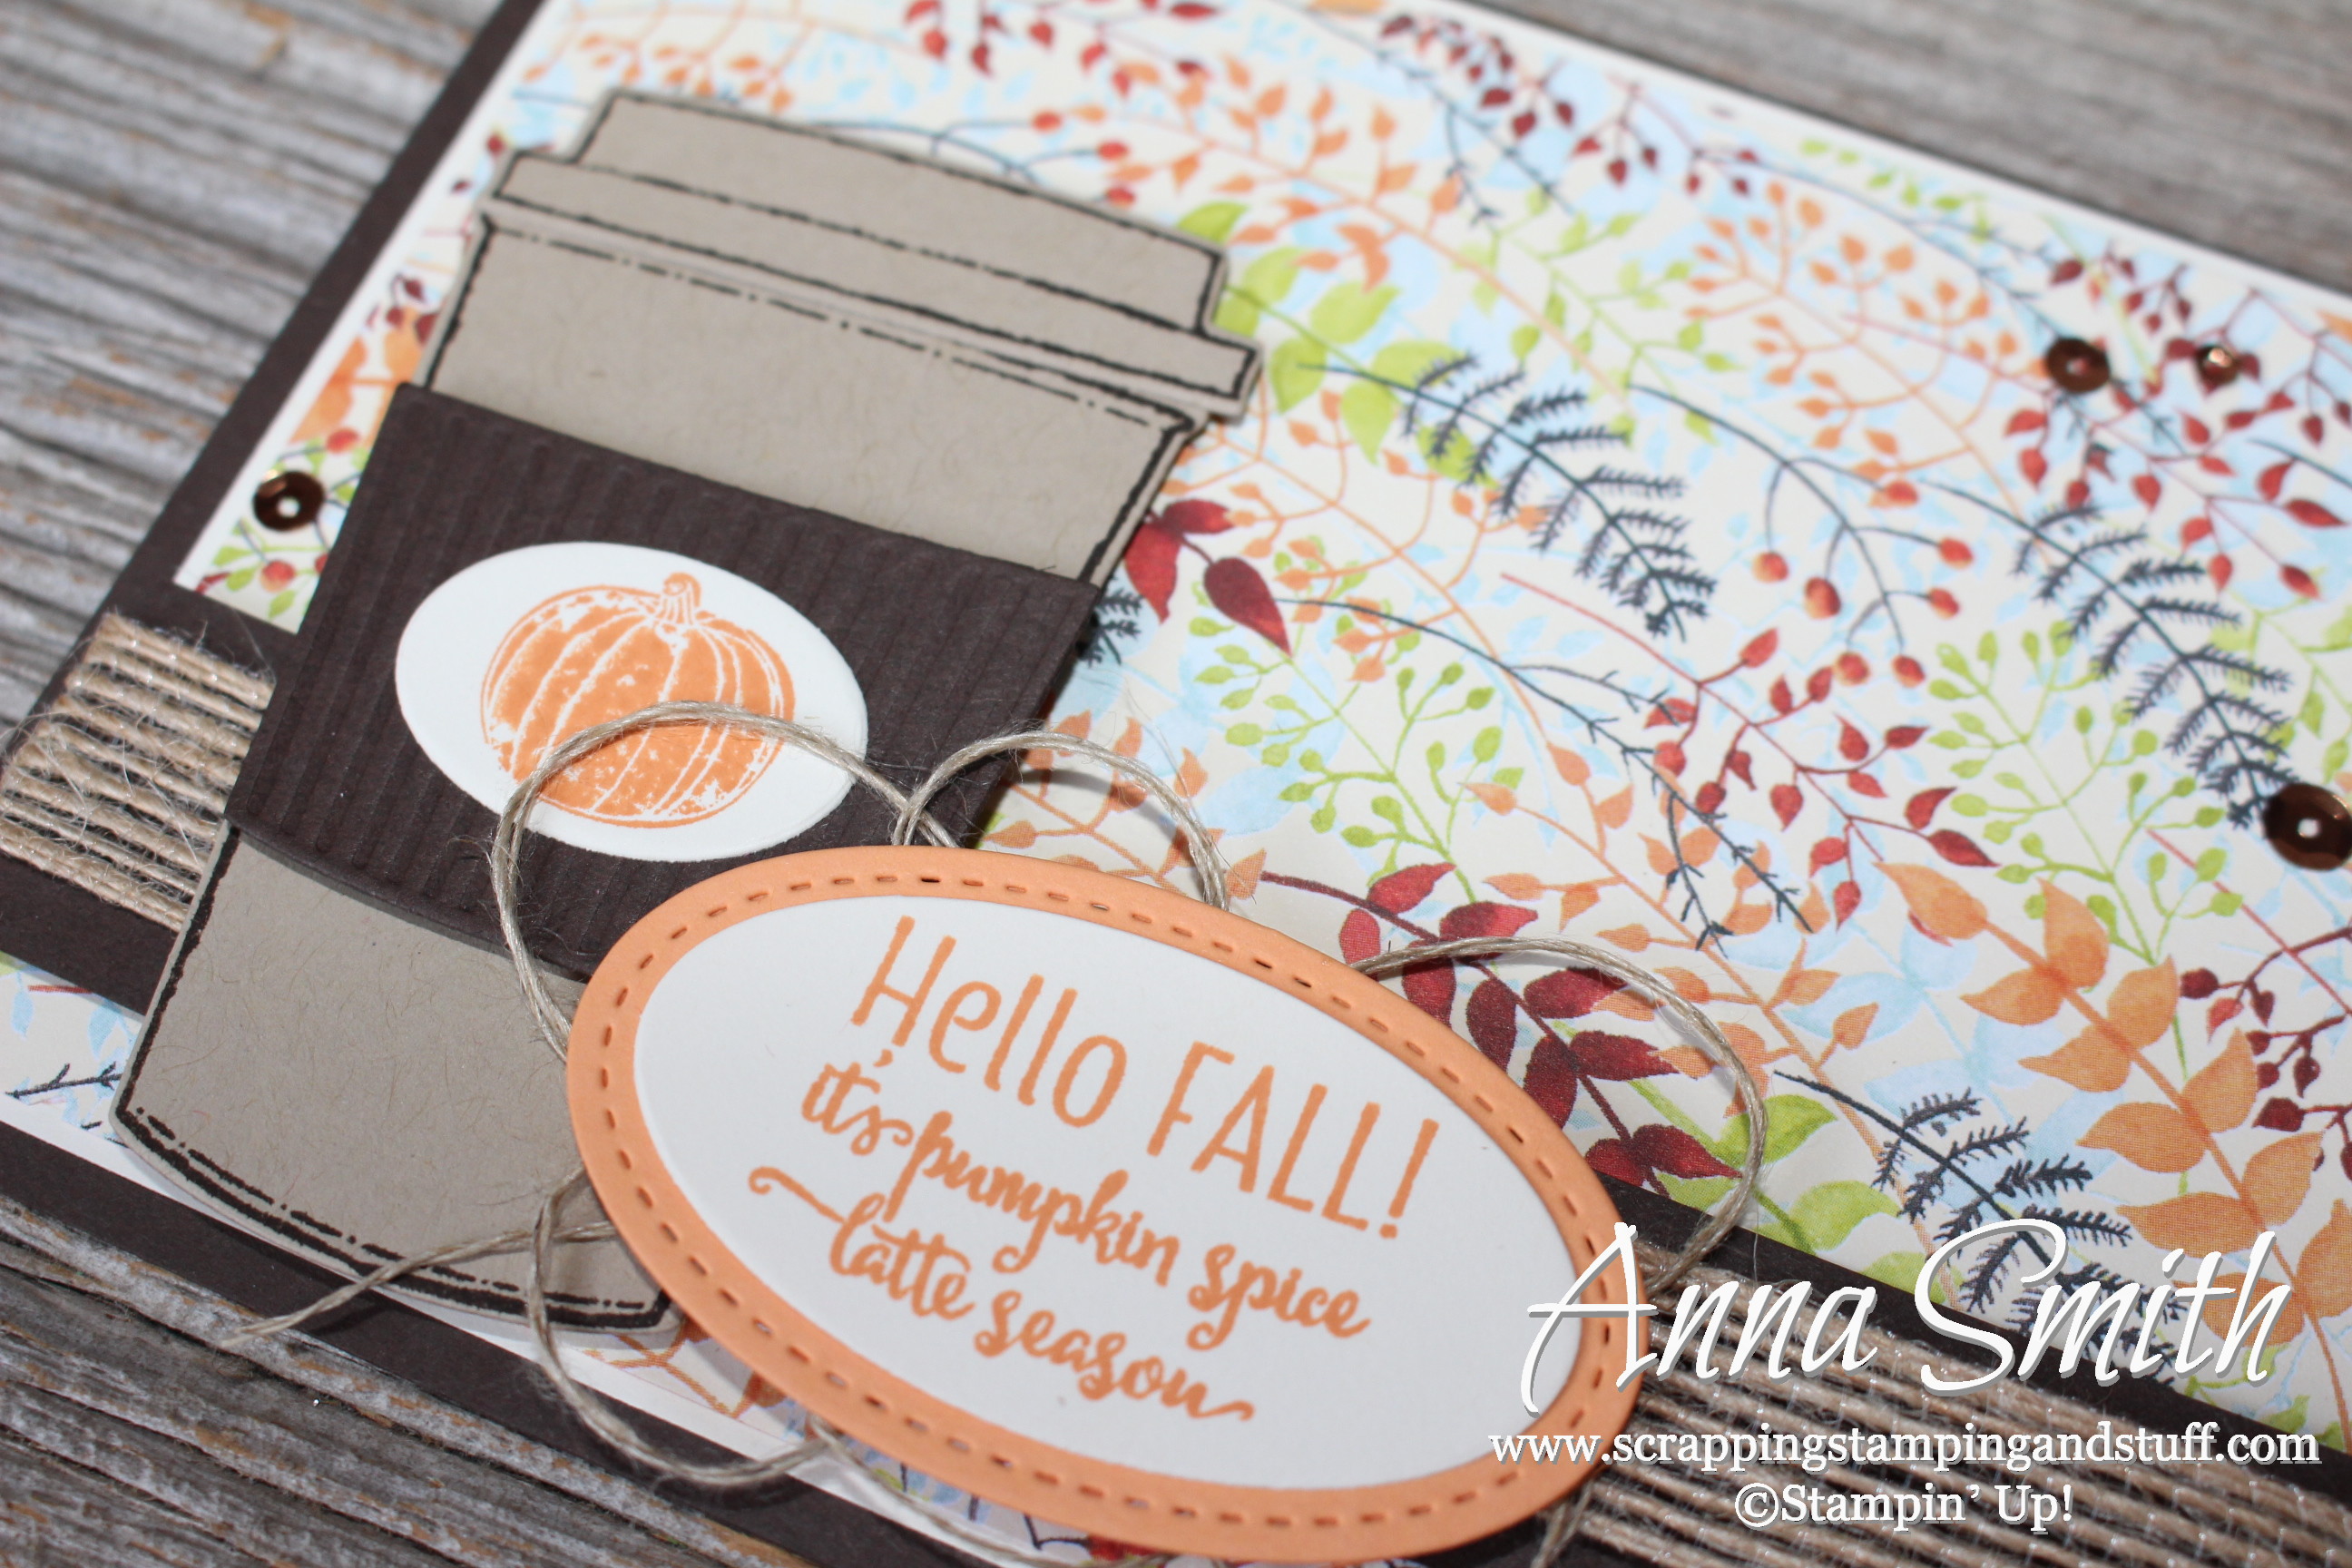 A Pumpkin Spice Latte Card with Stampin’ Up! Merry Cafe